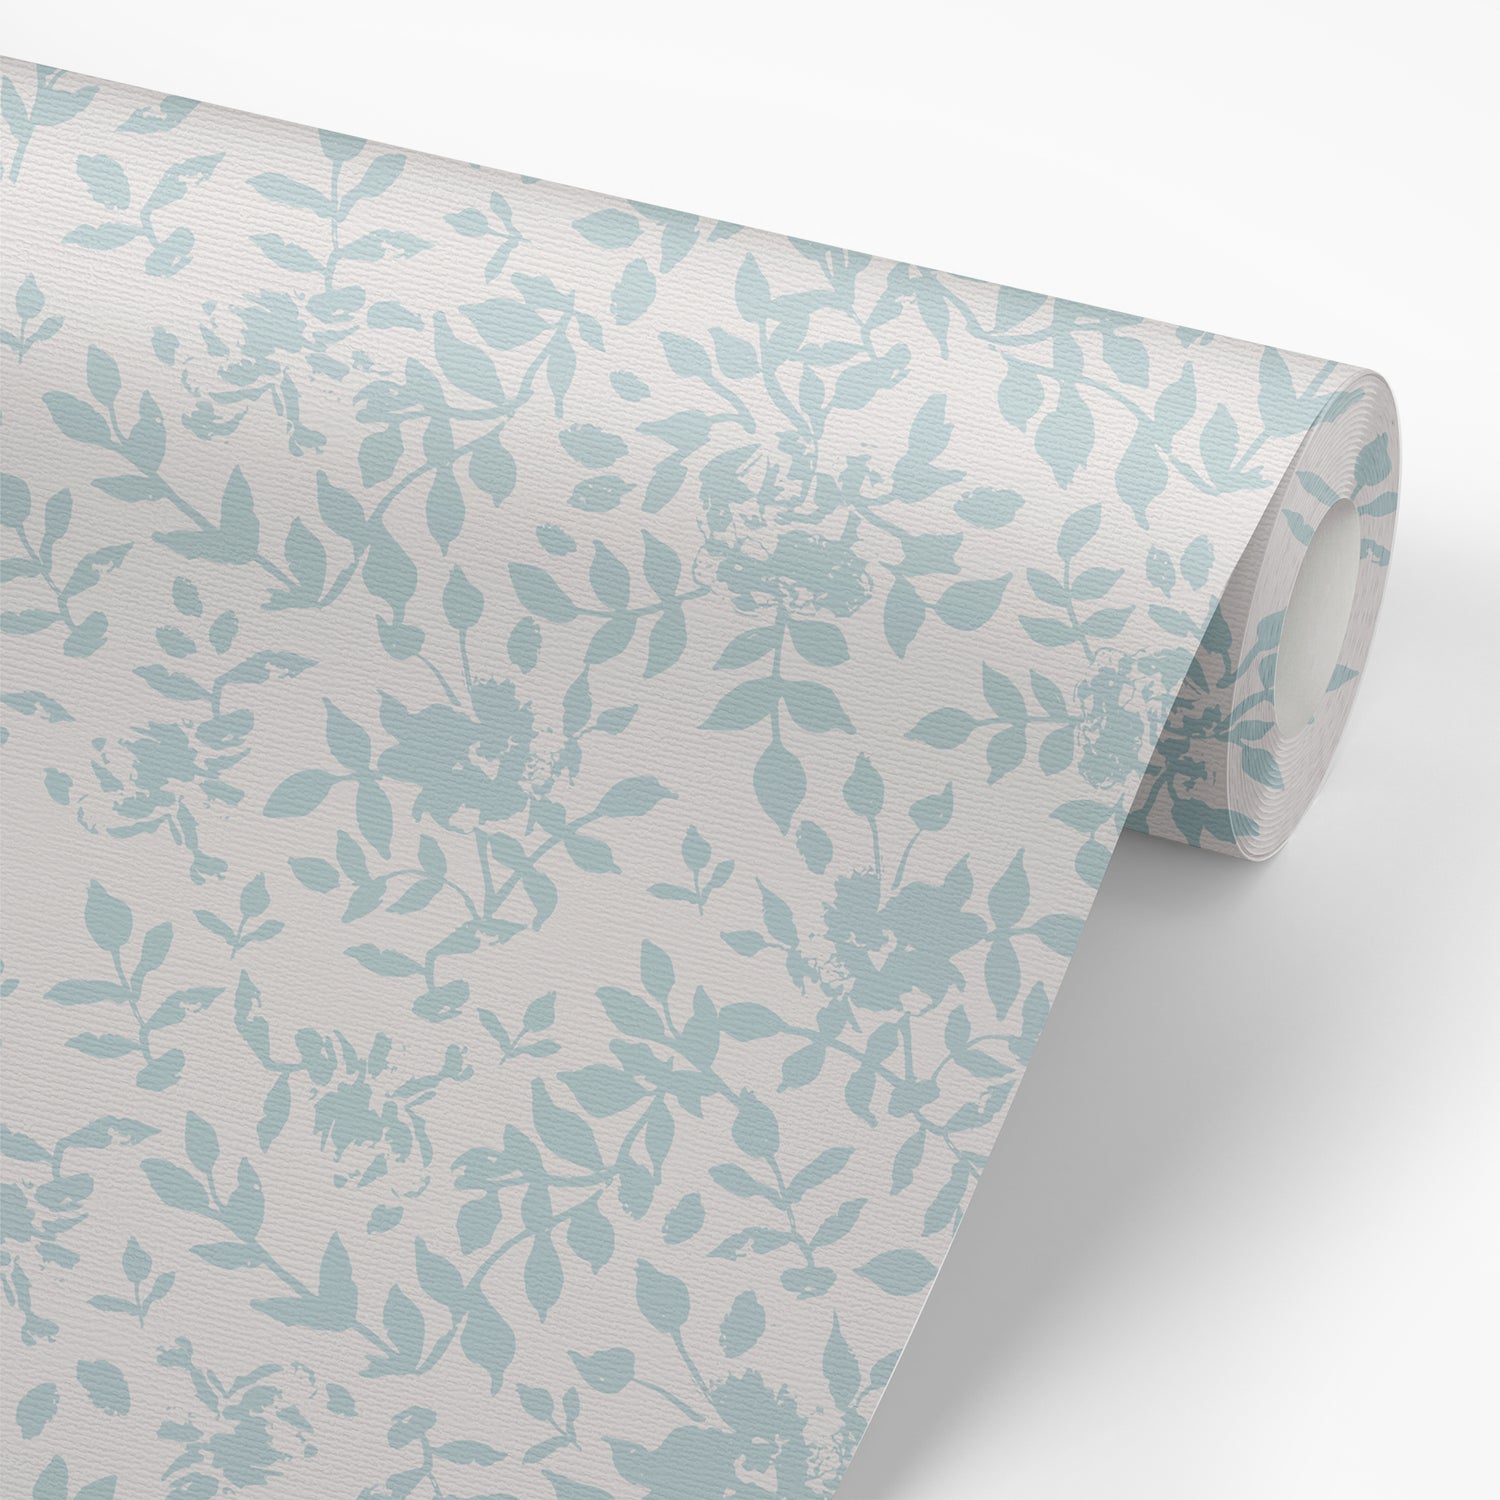 Wallpaper panel featuring our Florence Peel and Stick Wallpaper in sky blue and white by Jackie O'Bosky. These floral silhouettes make a beautiful accent wall or statement wall!